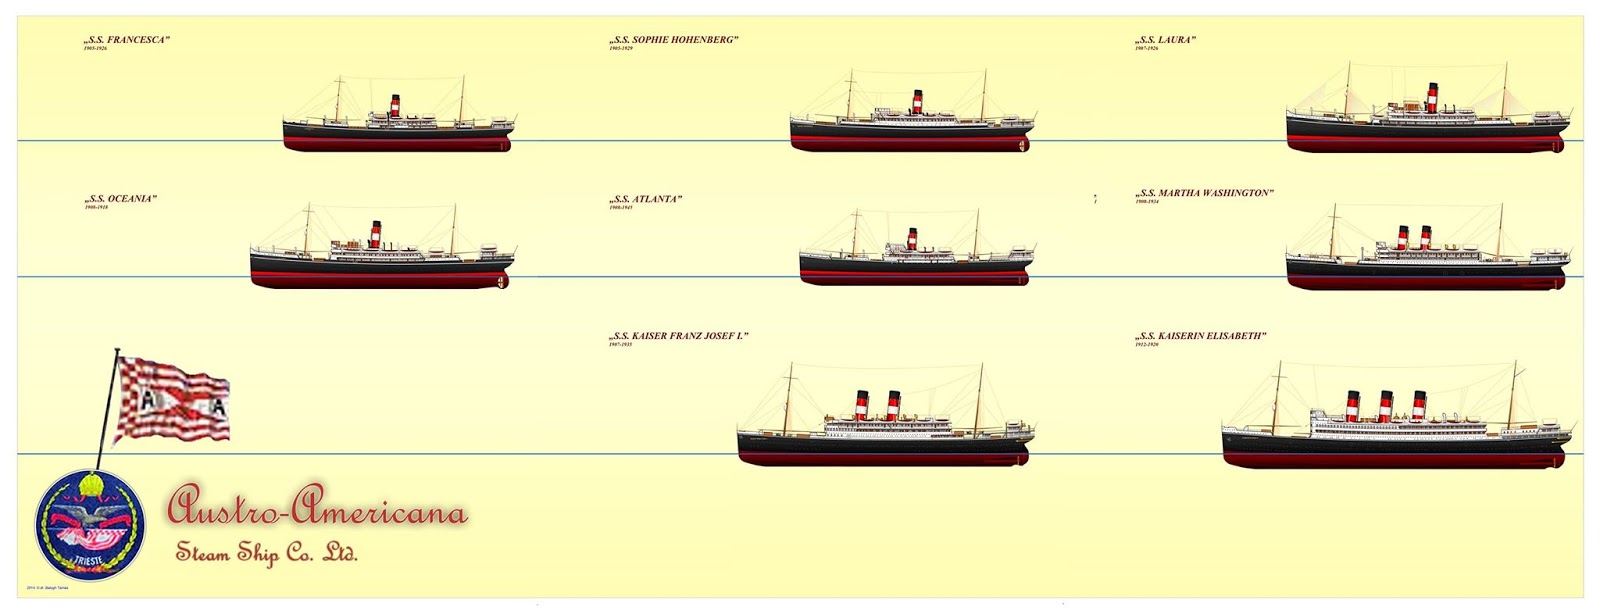 Other ships owened by the Austro-Americana Line (Last one "Kaiserin Elizabeth" was never finished)